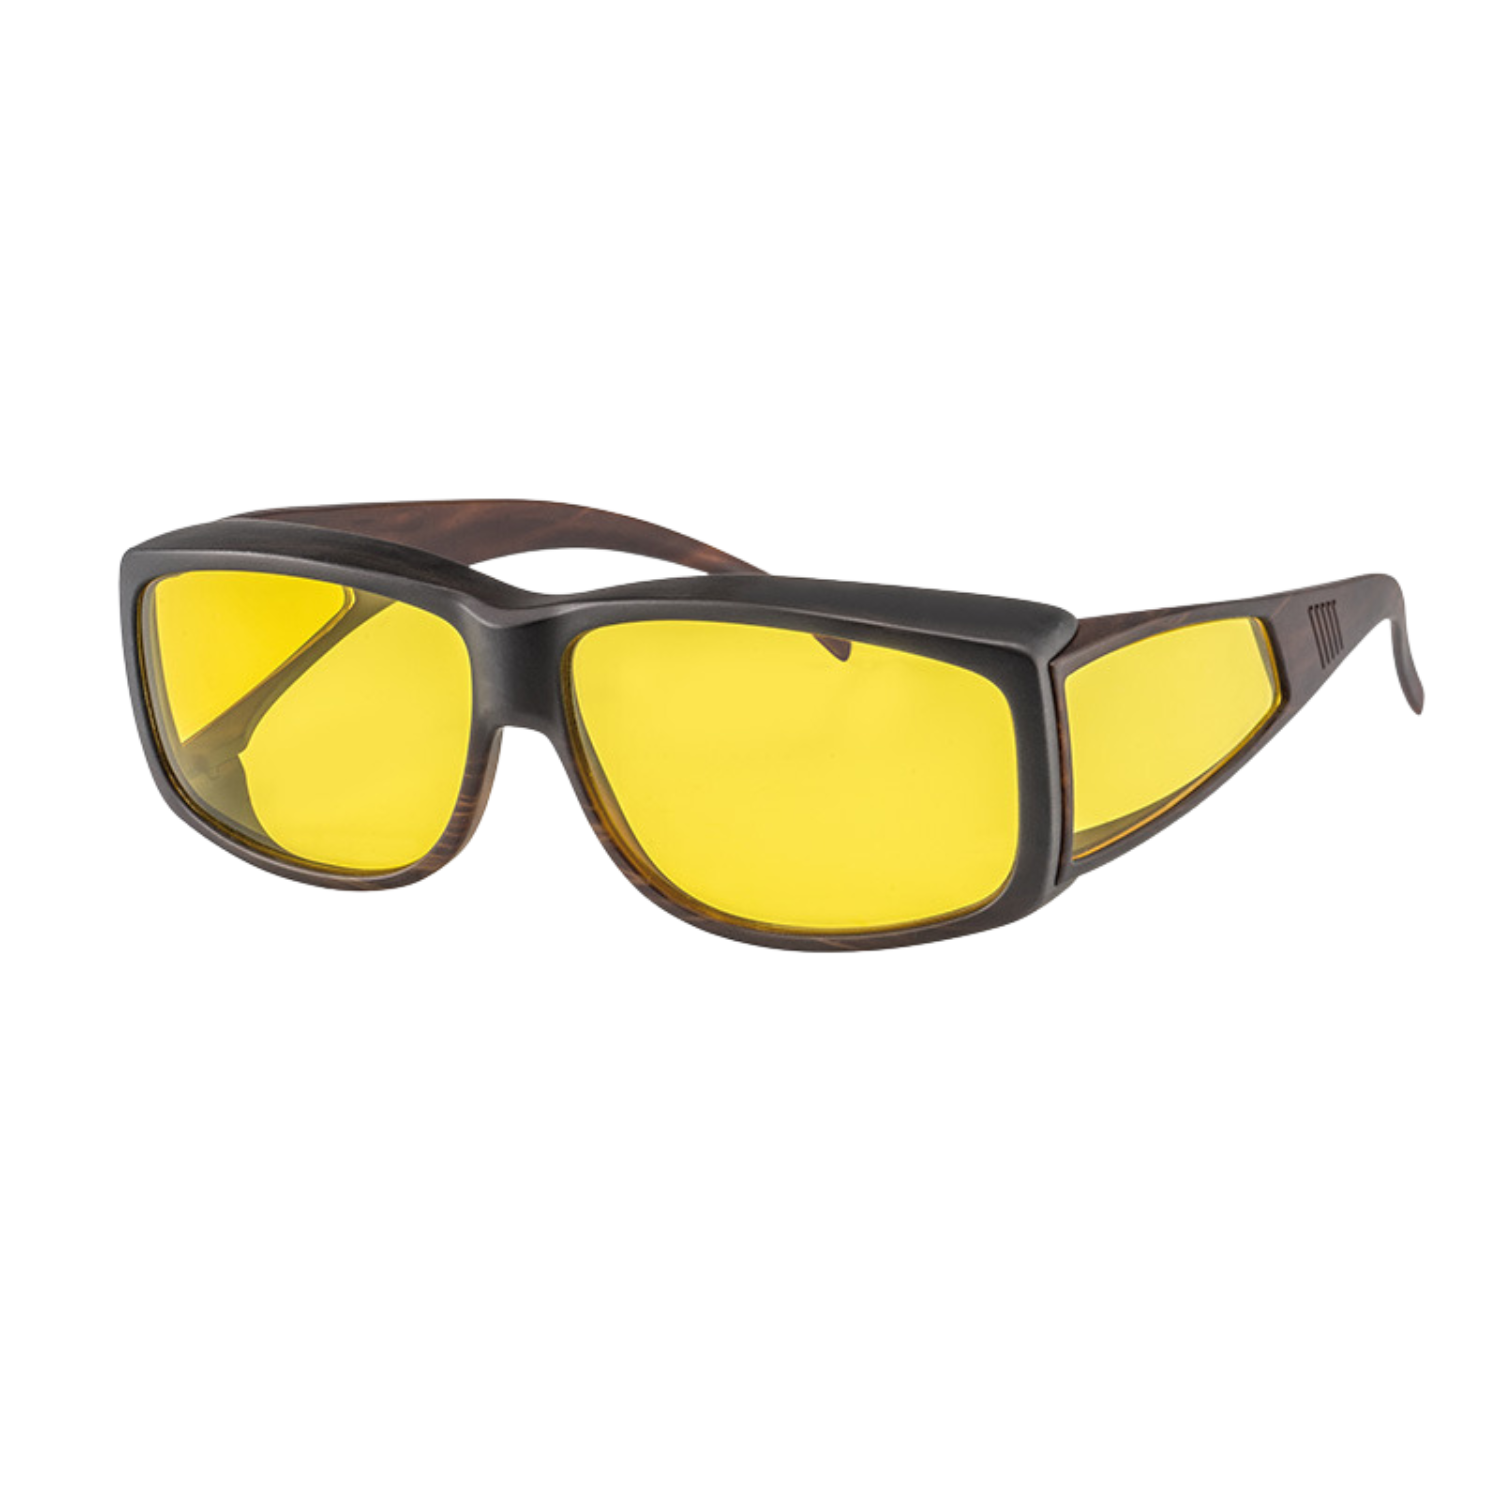 Image of the Asensys XL blue light blocking sunglasses with yellow tint from Eschenbach.